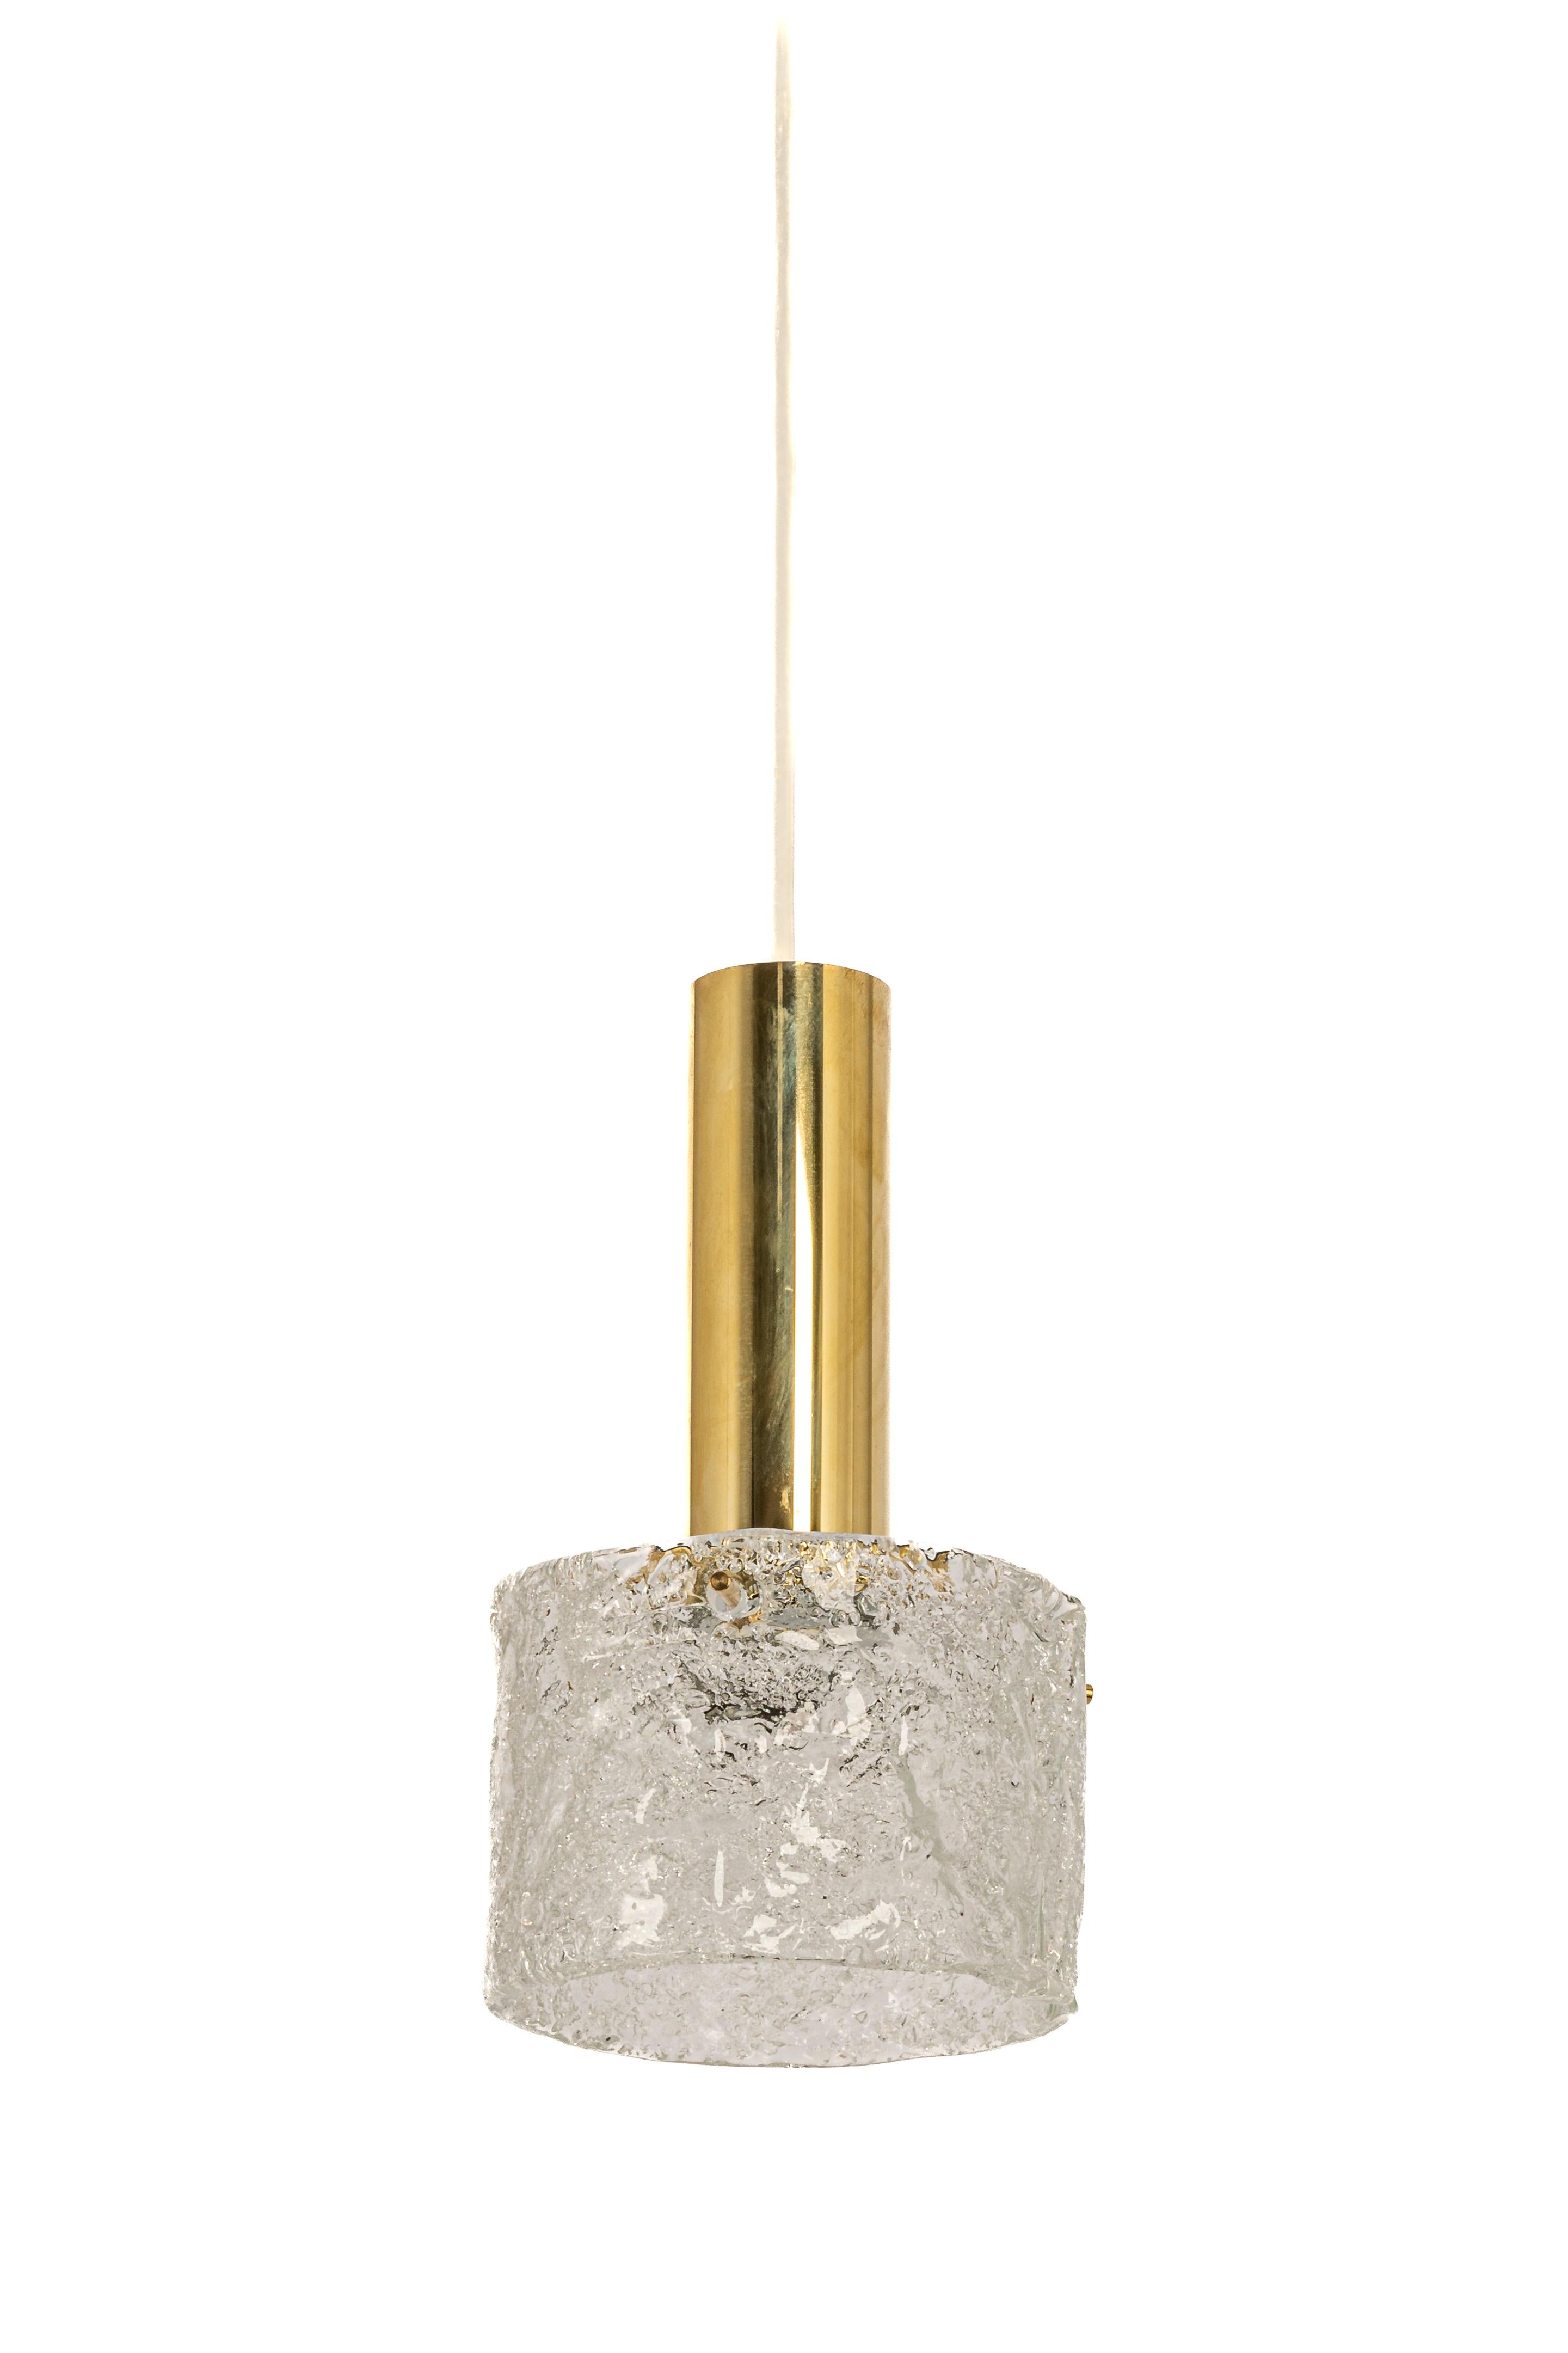 1 of 4 Petite Murano Pendant Lights by Hillebrand, 1960s In Good Condition For Sale In Aachen, NRW